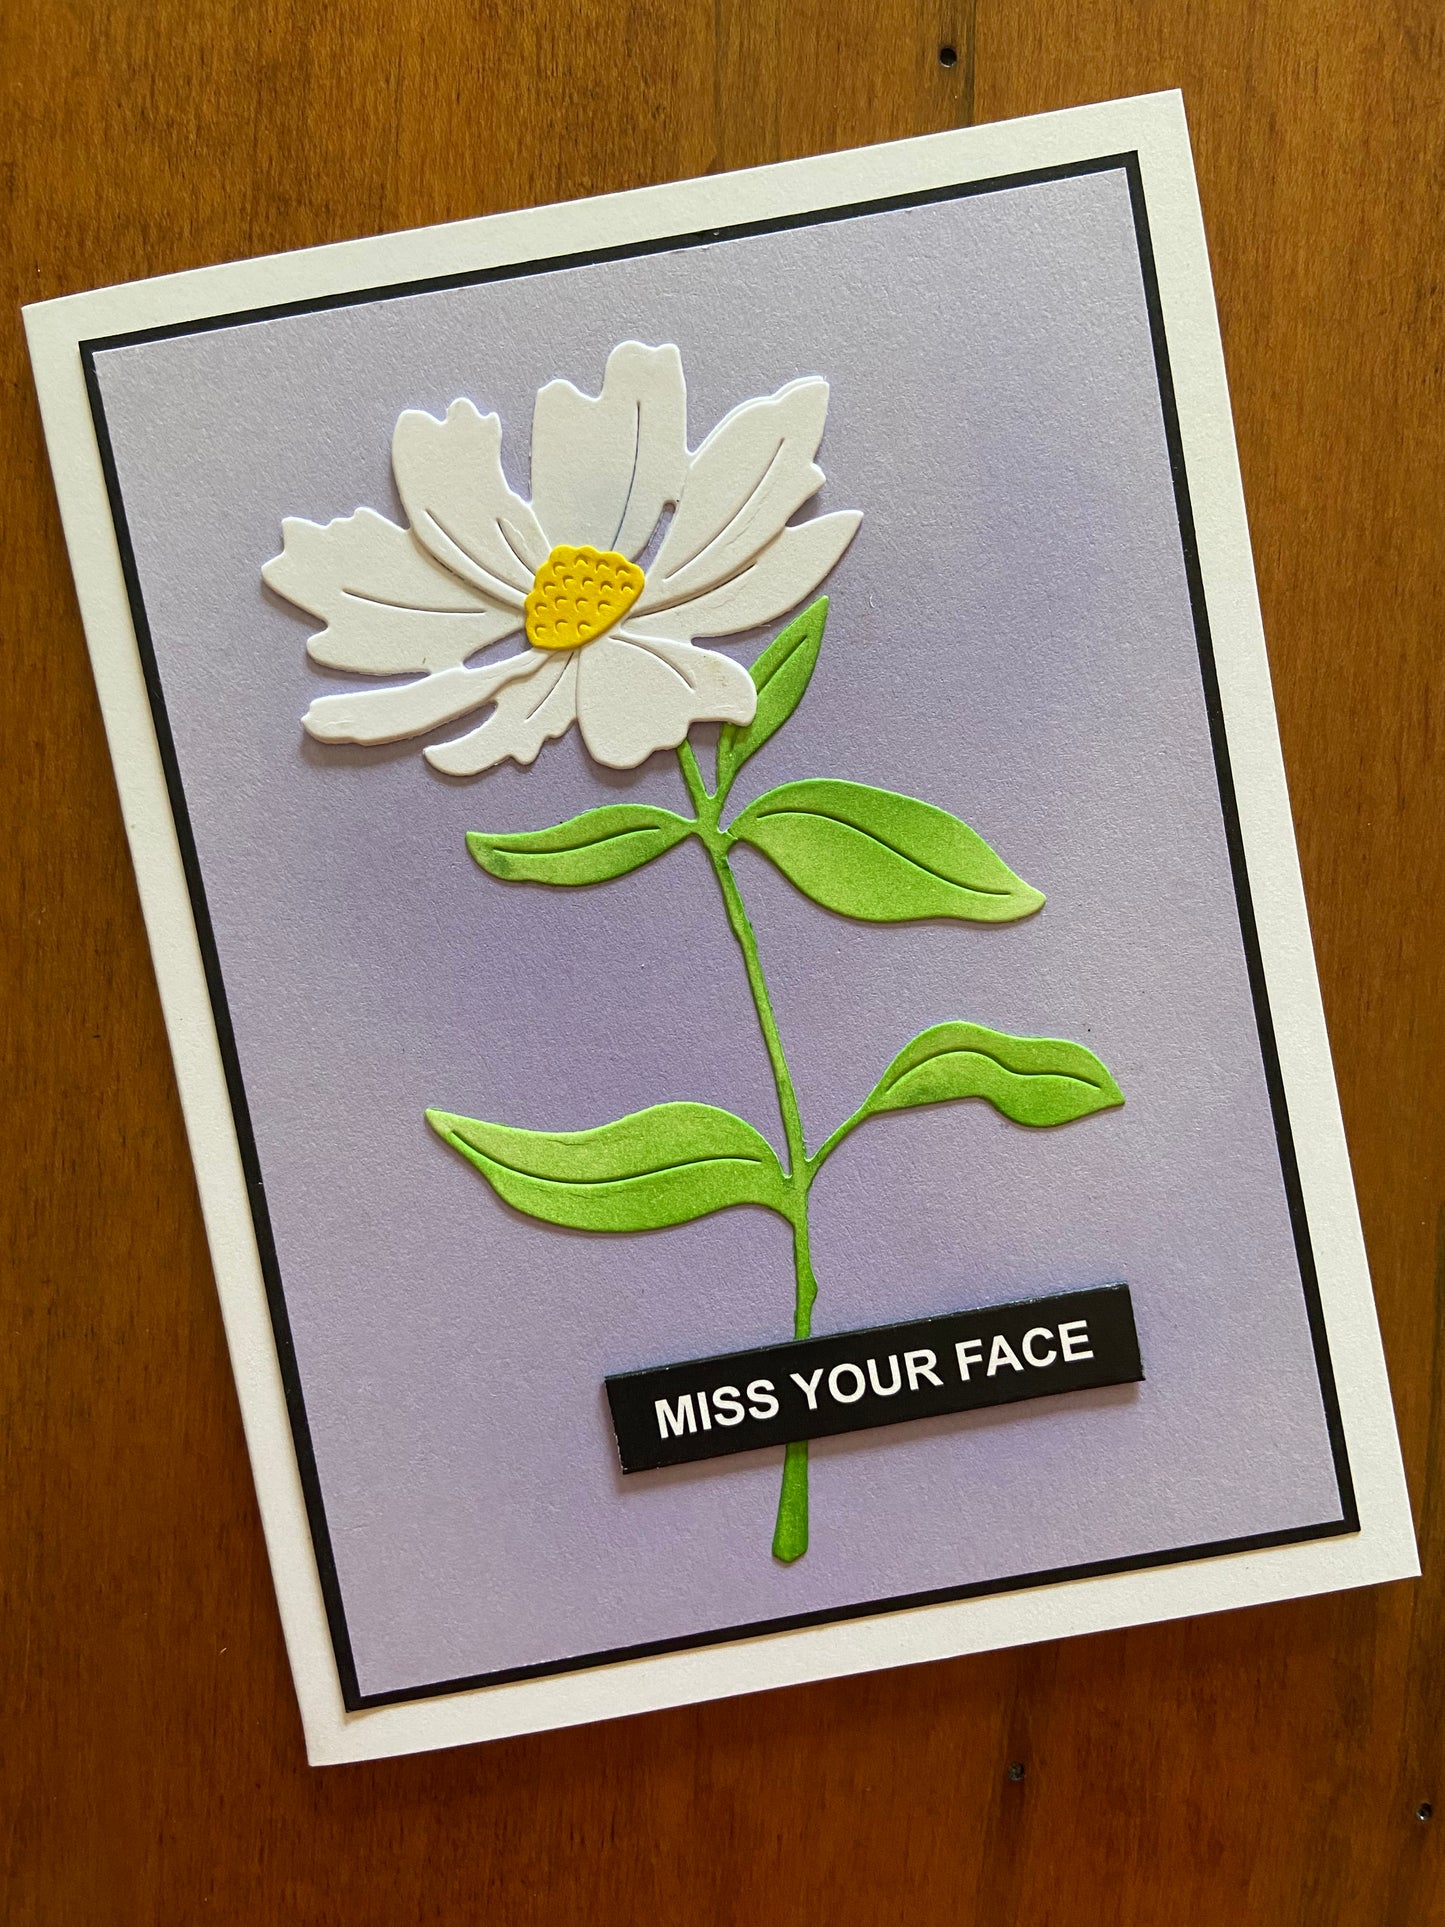 2-Card Pack; Any Occasion & Miss Your Face Cards